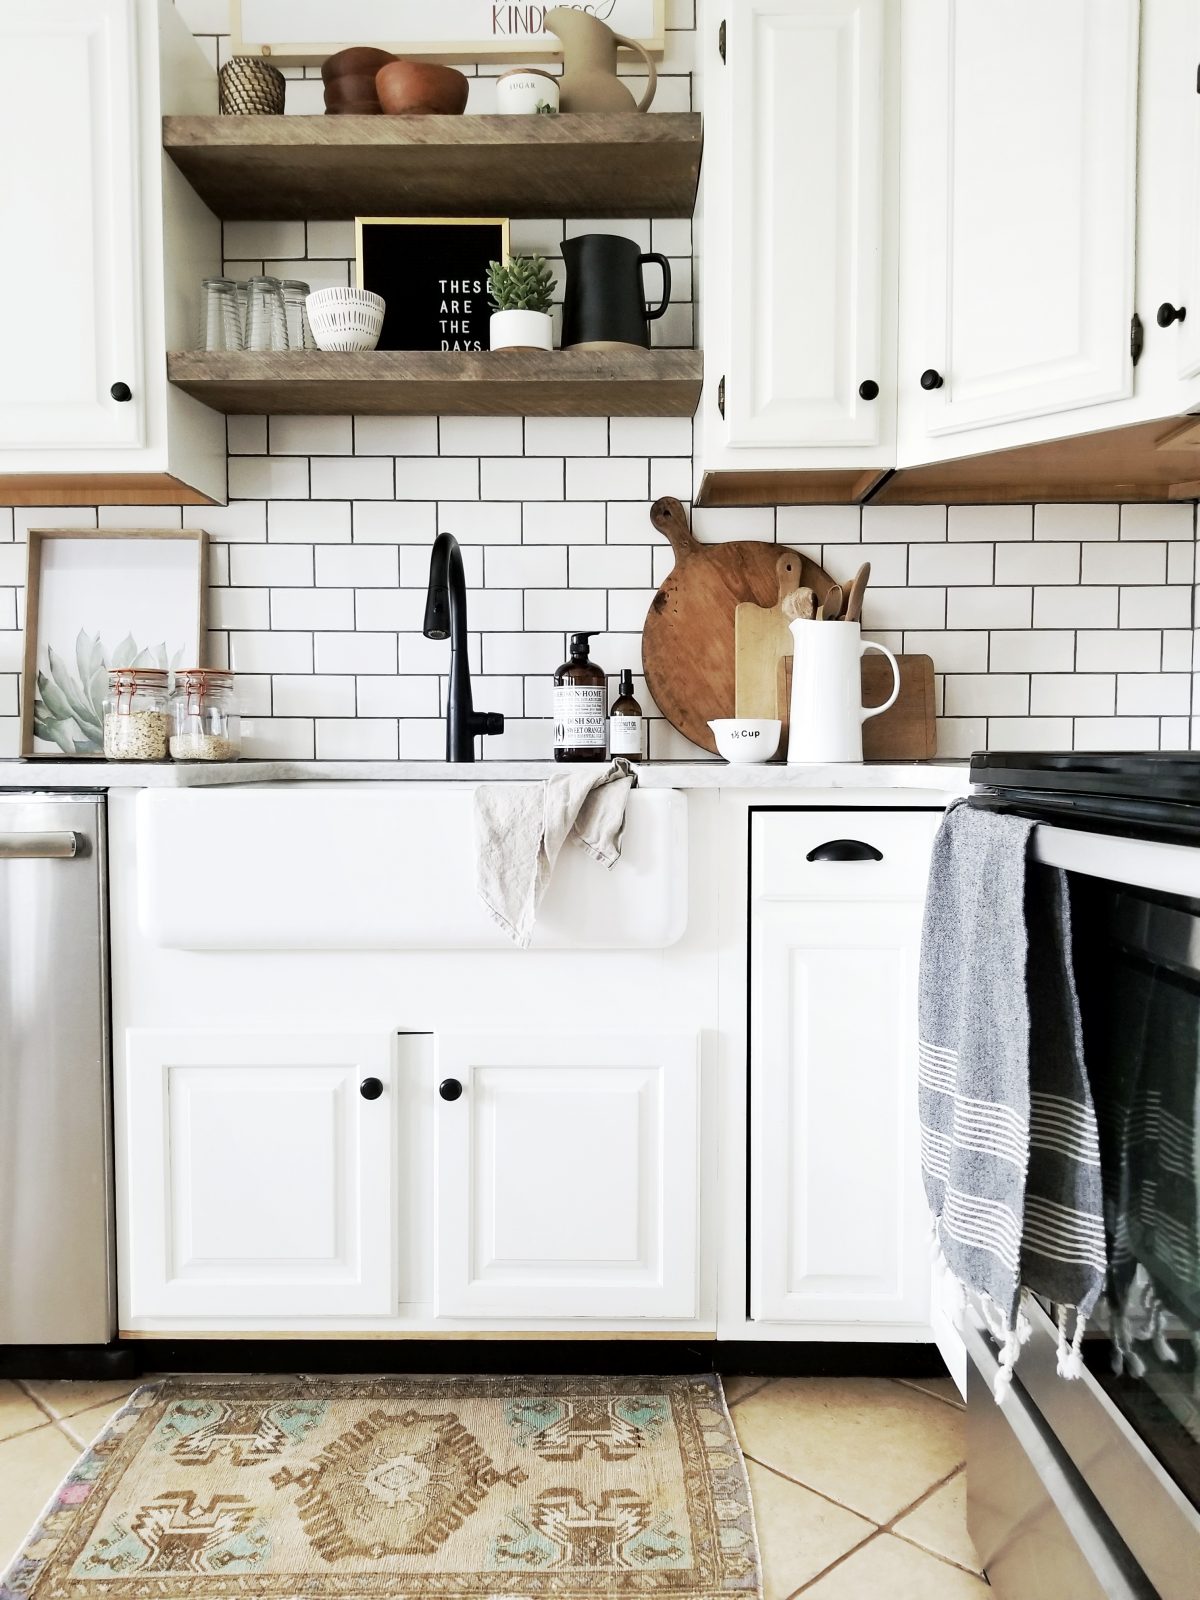 Before & After: Our Kitchen Story - Part 1 - Showit Blog